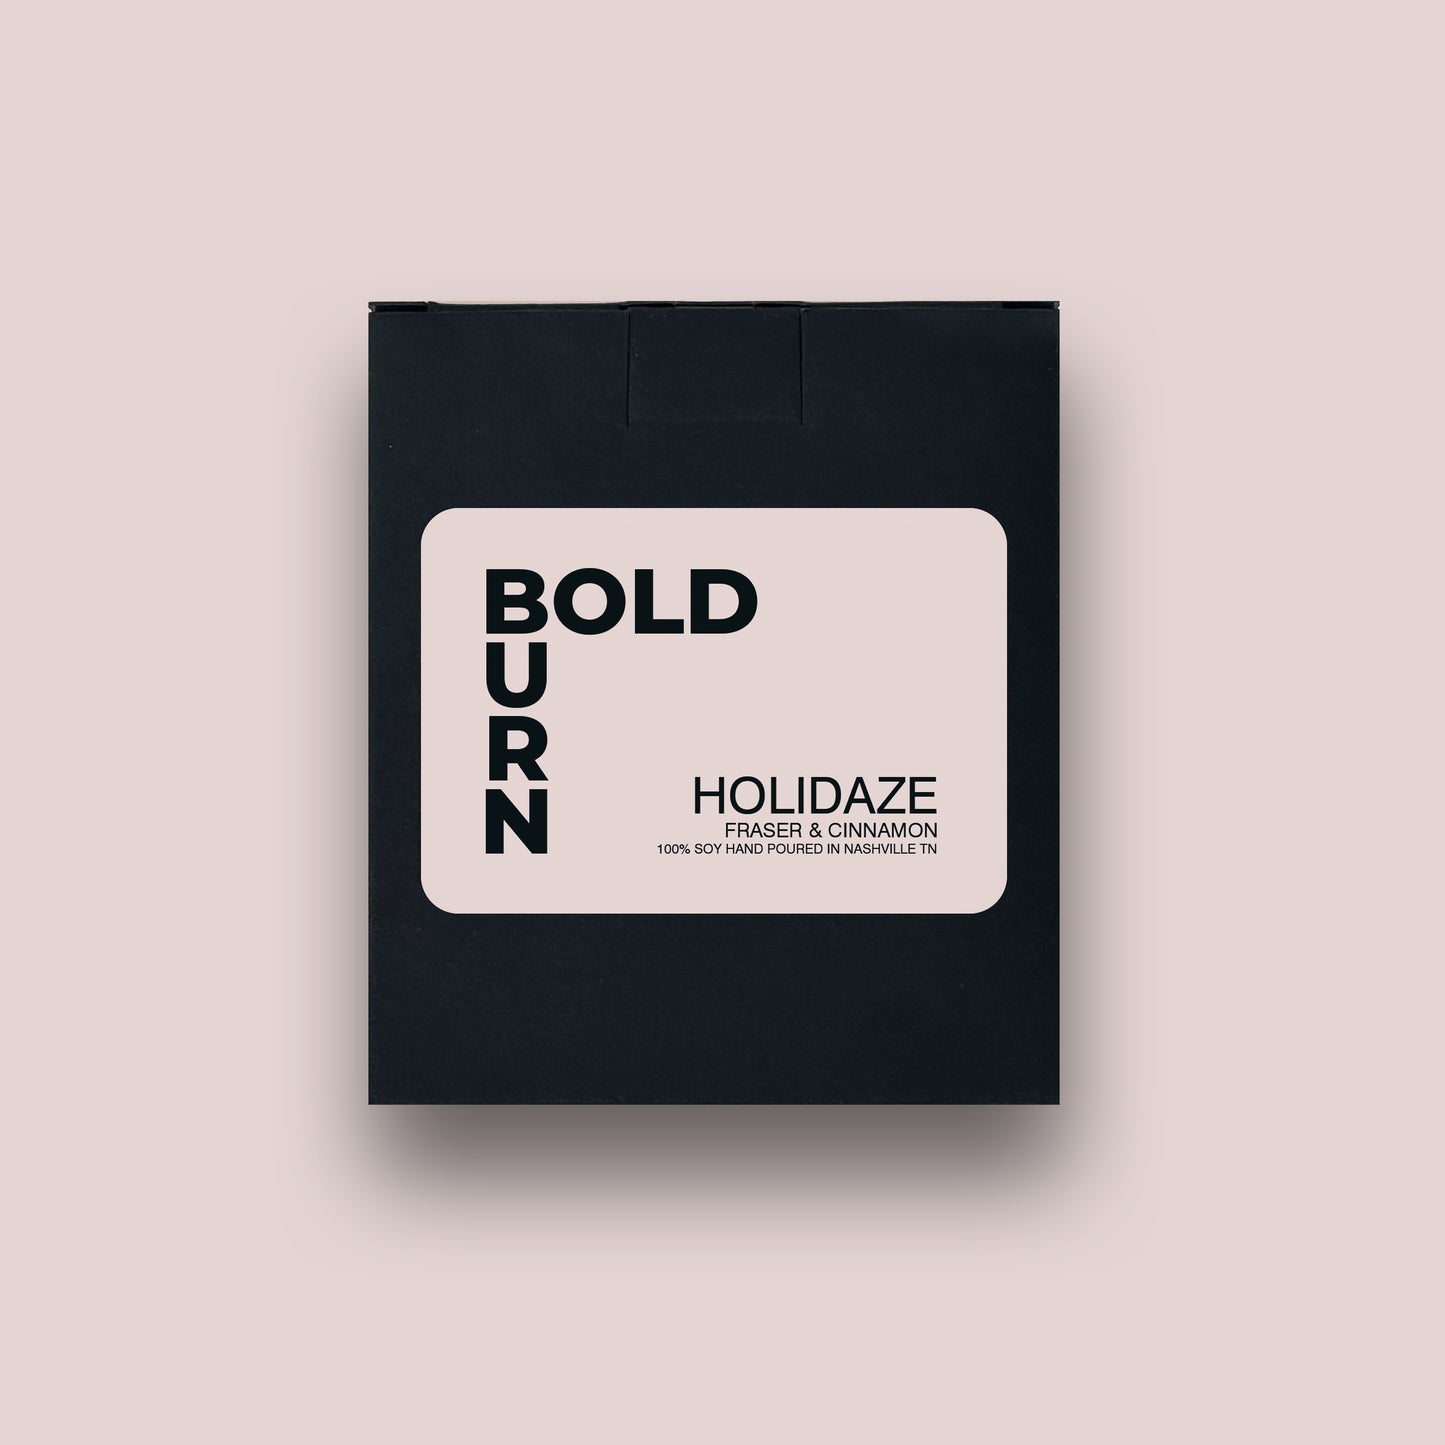 Bold Burn Holidaze two-wick candle black gift box with white label containing the Bold Burn label and product name